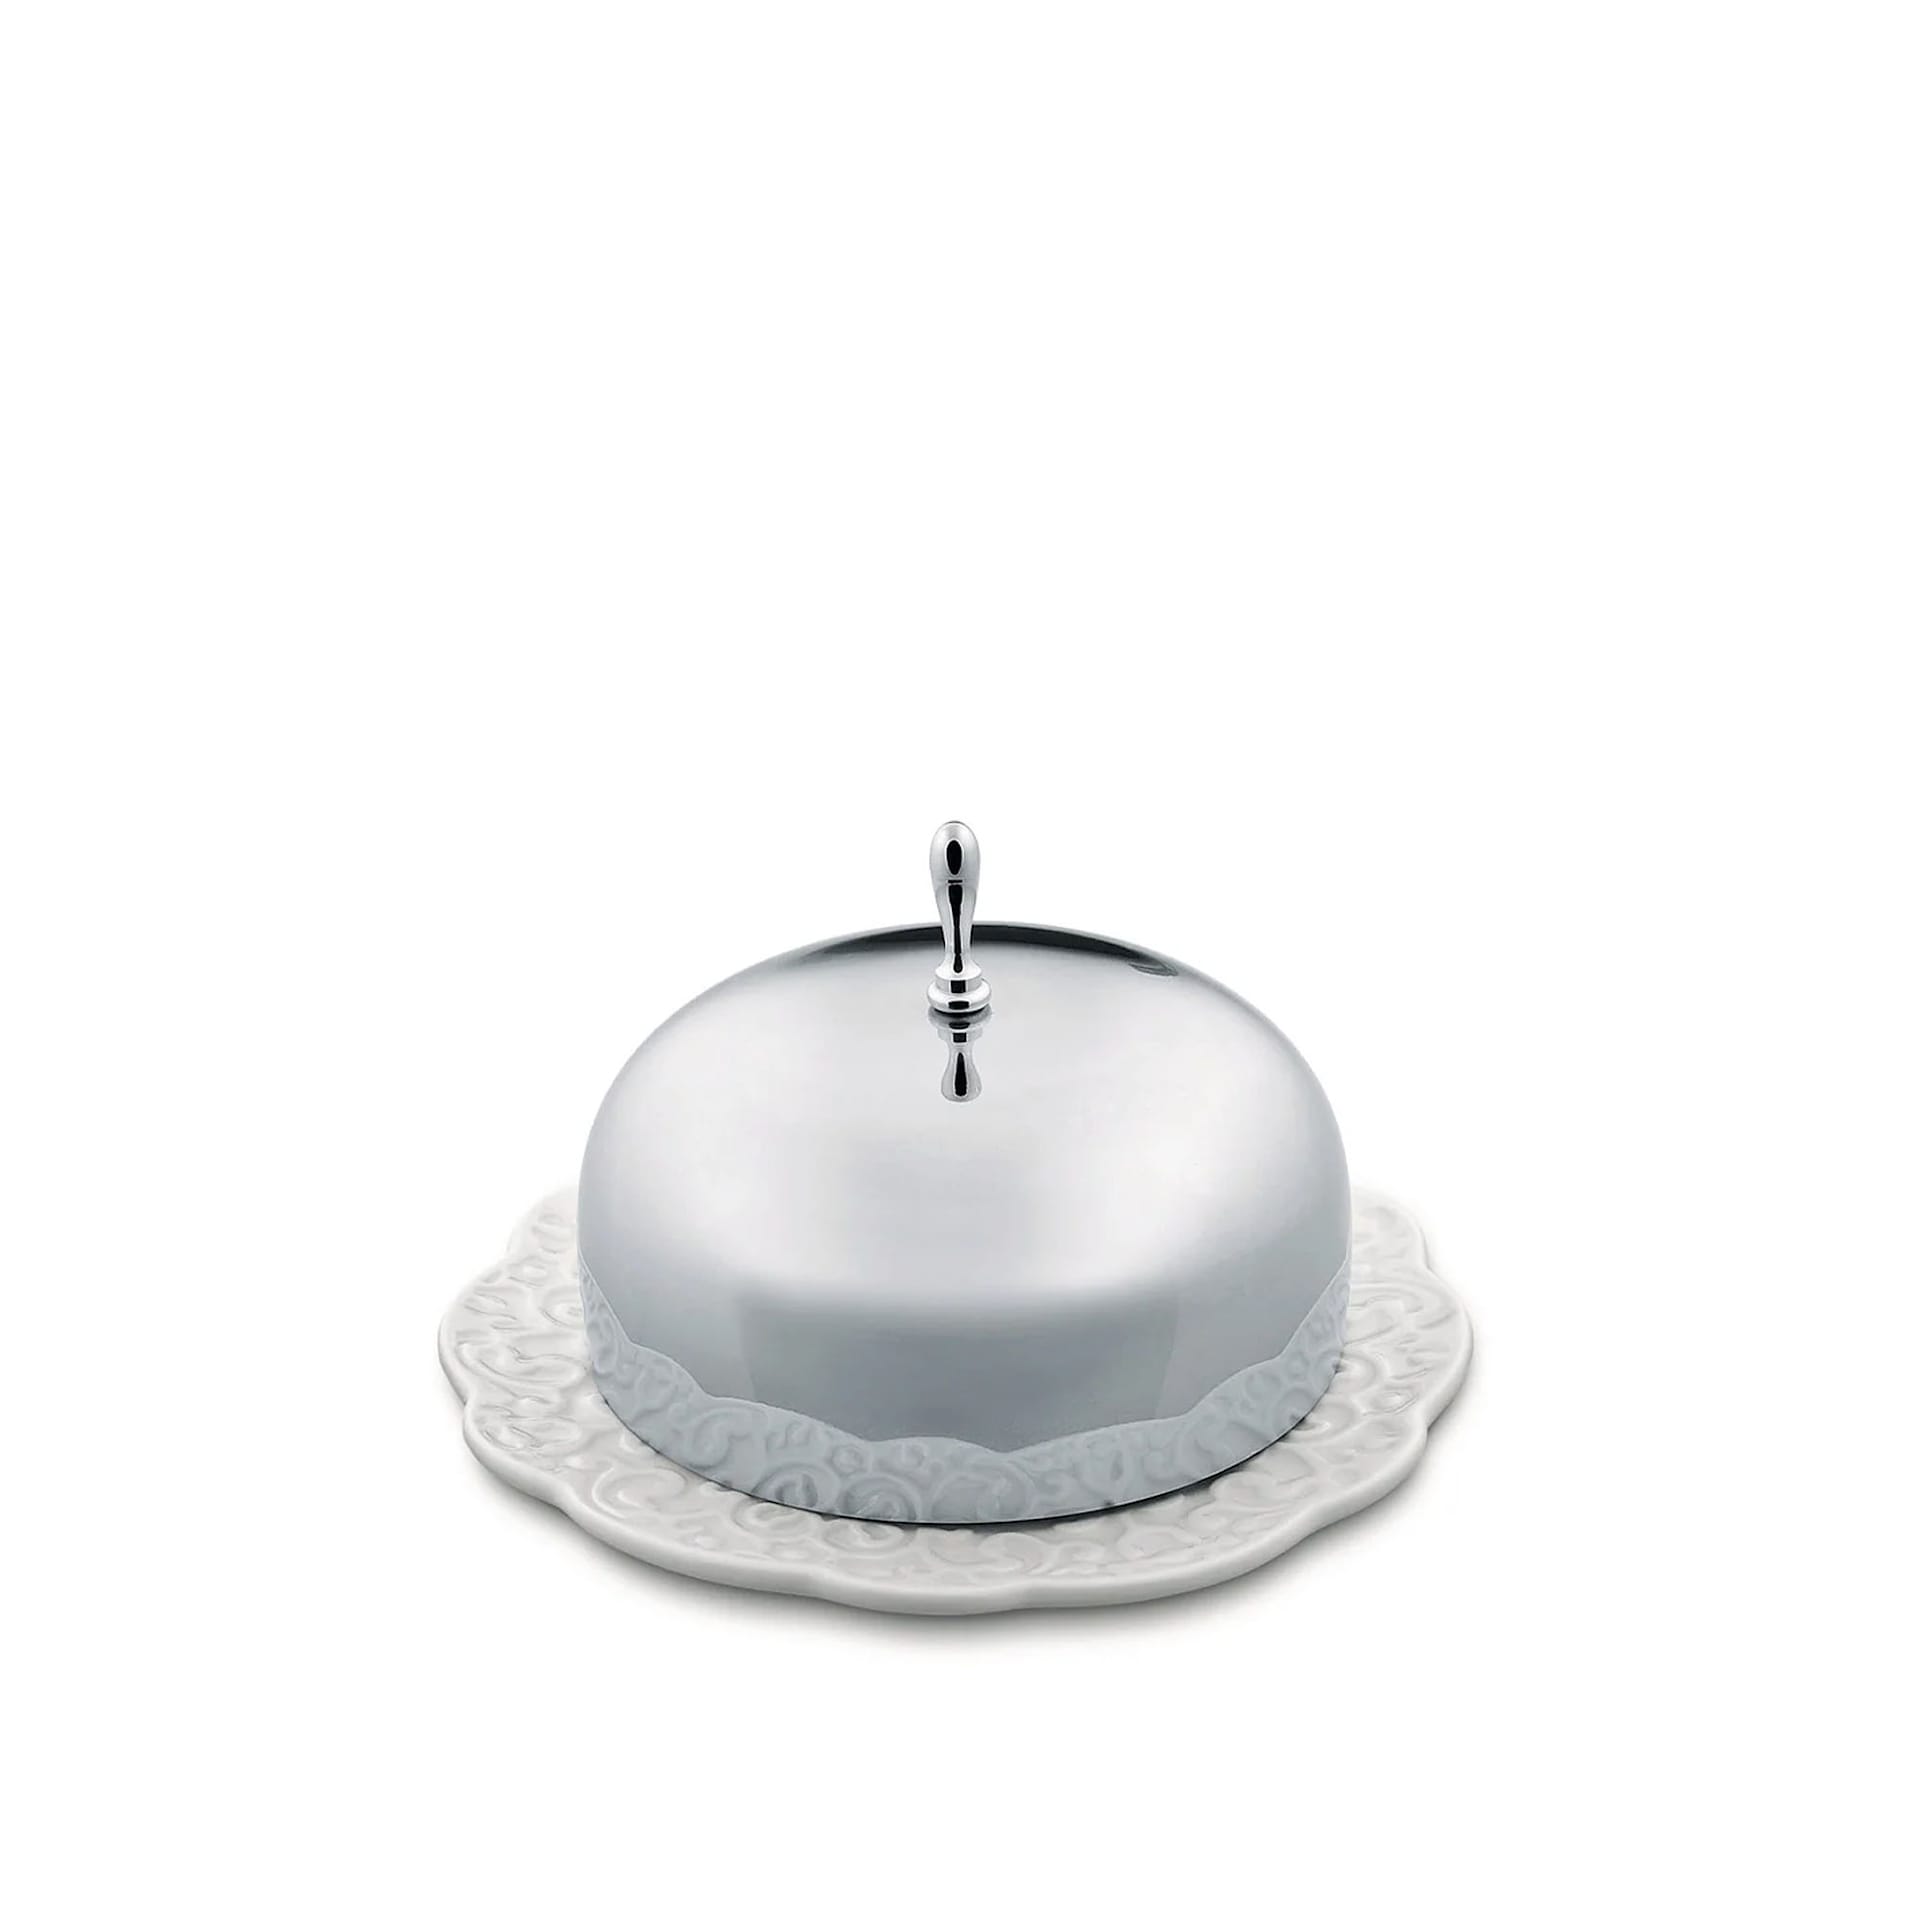 Dressed Butter dish - Alessi - Marcel Wanders - NO GA